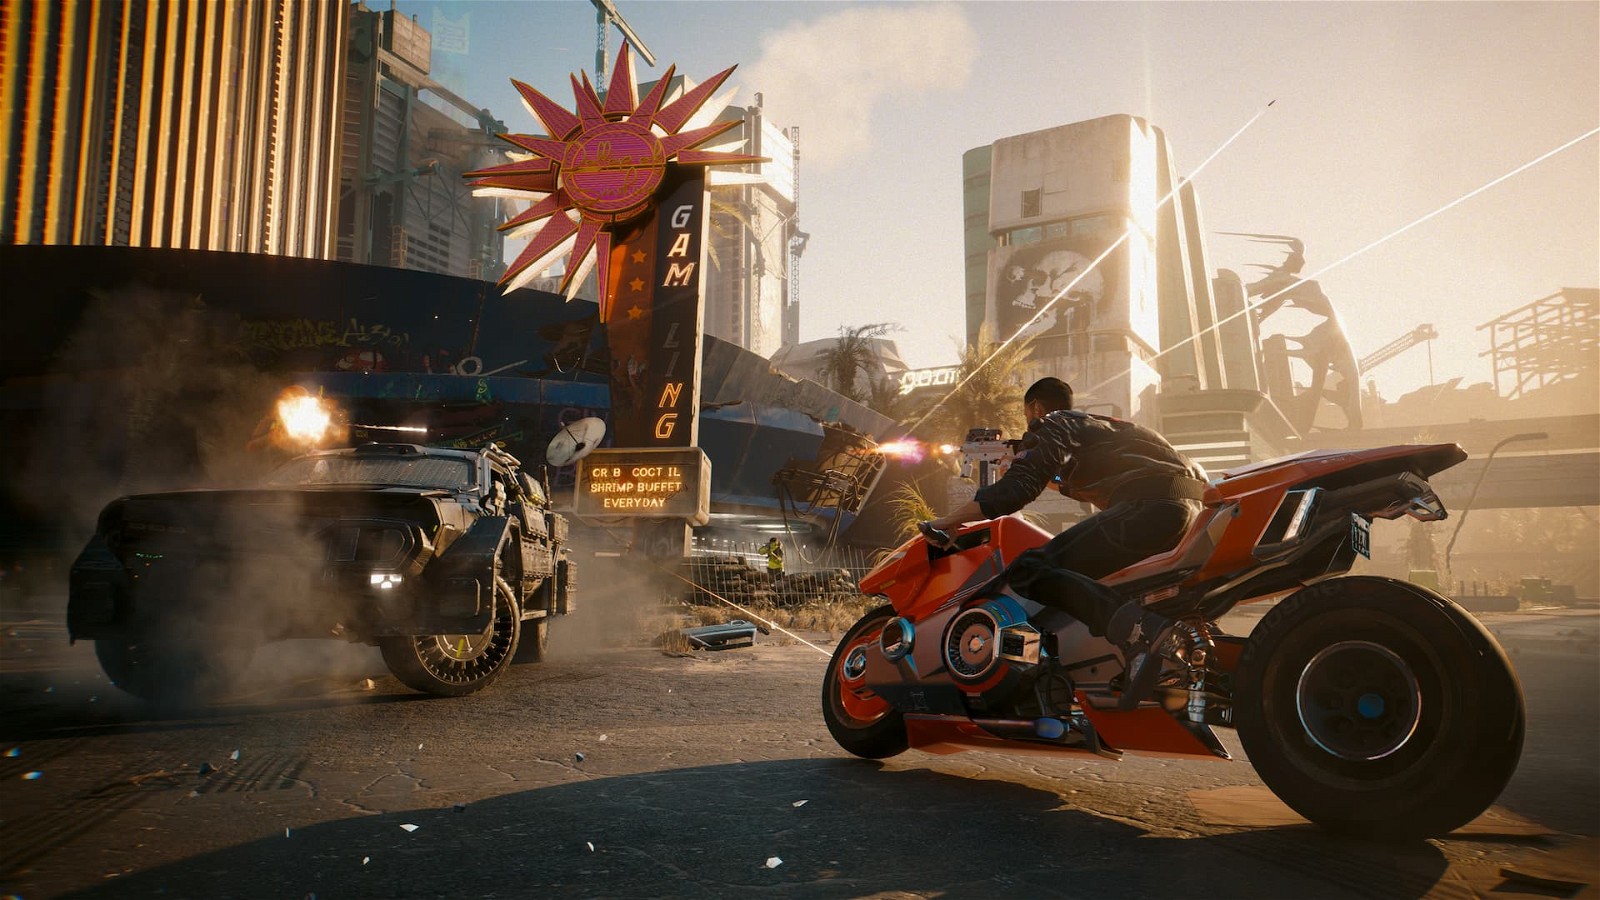 Update 2.0 will bring fan-requested feature to Cyberpunk 2077 - altering tattoos and scars